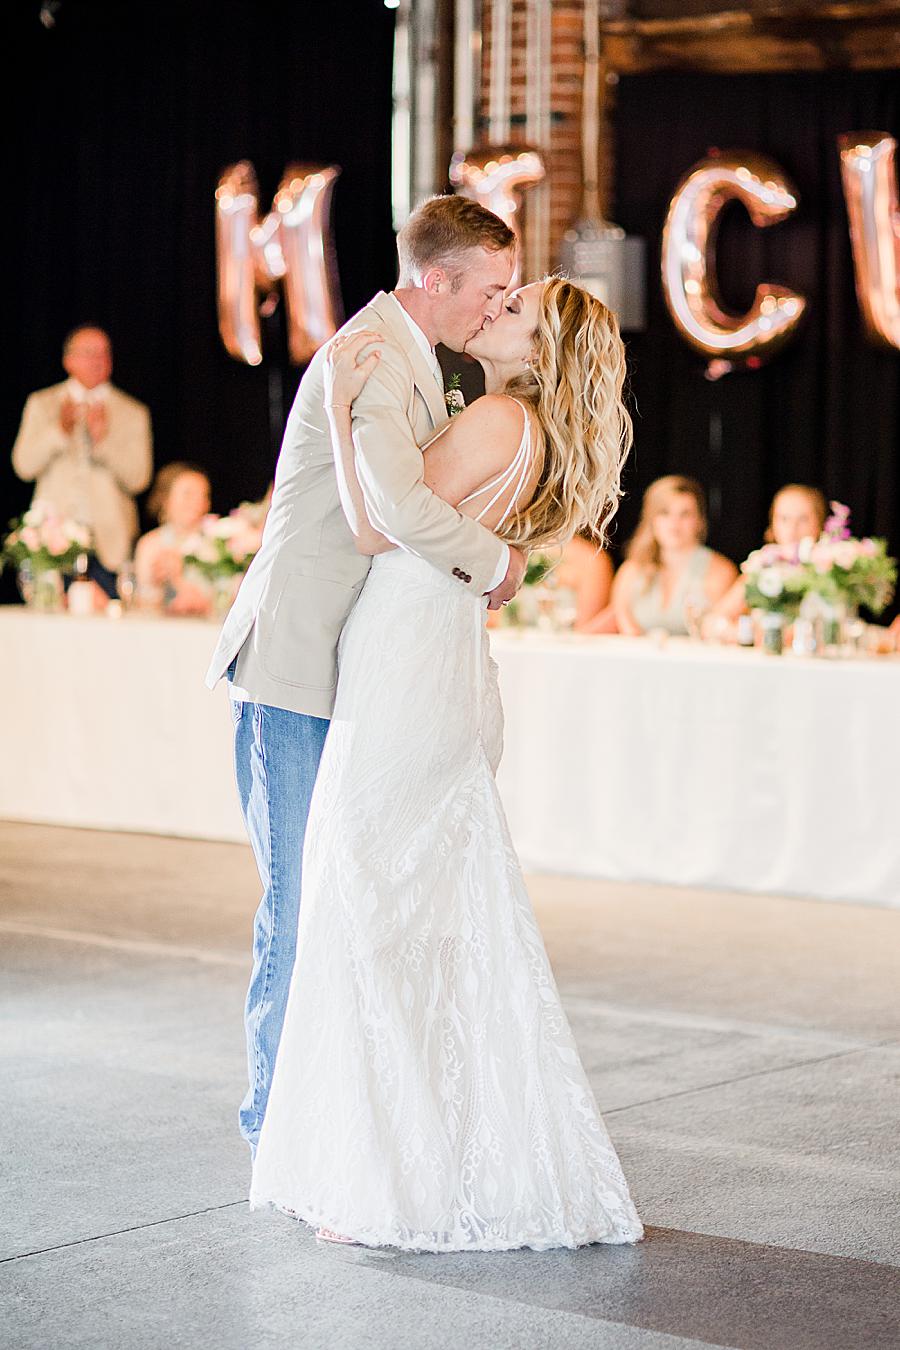 Mr. and Mrs. at this Dayton wedding by Knoxville Wedding Photographer, Amanda May Photos.